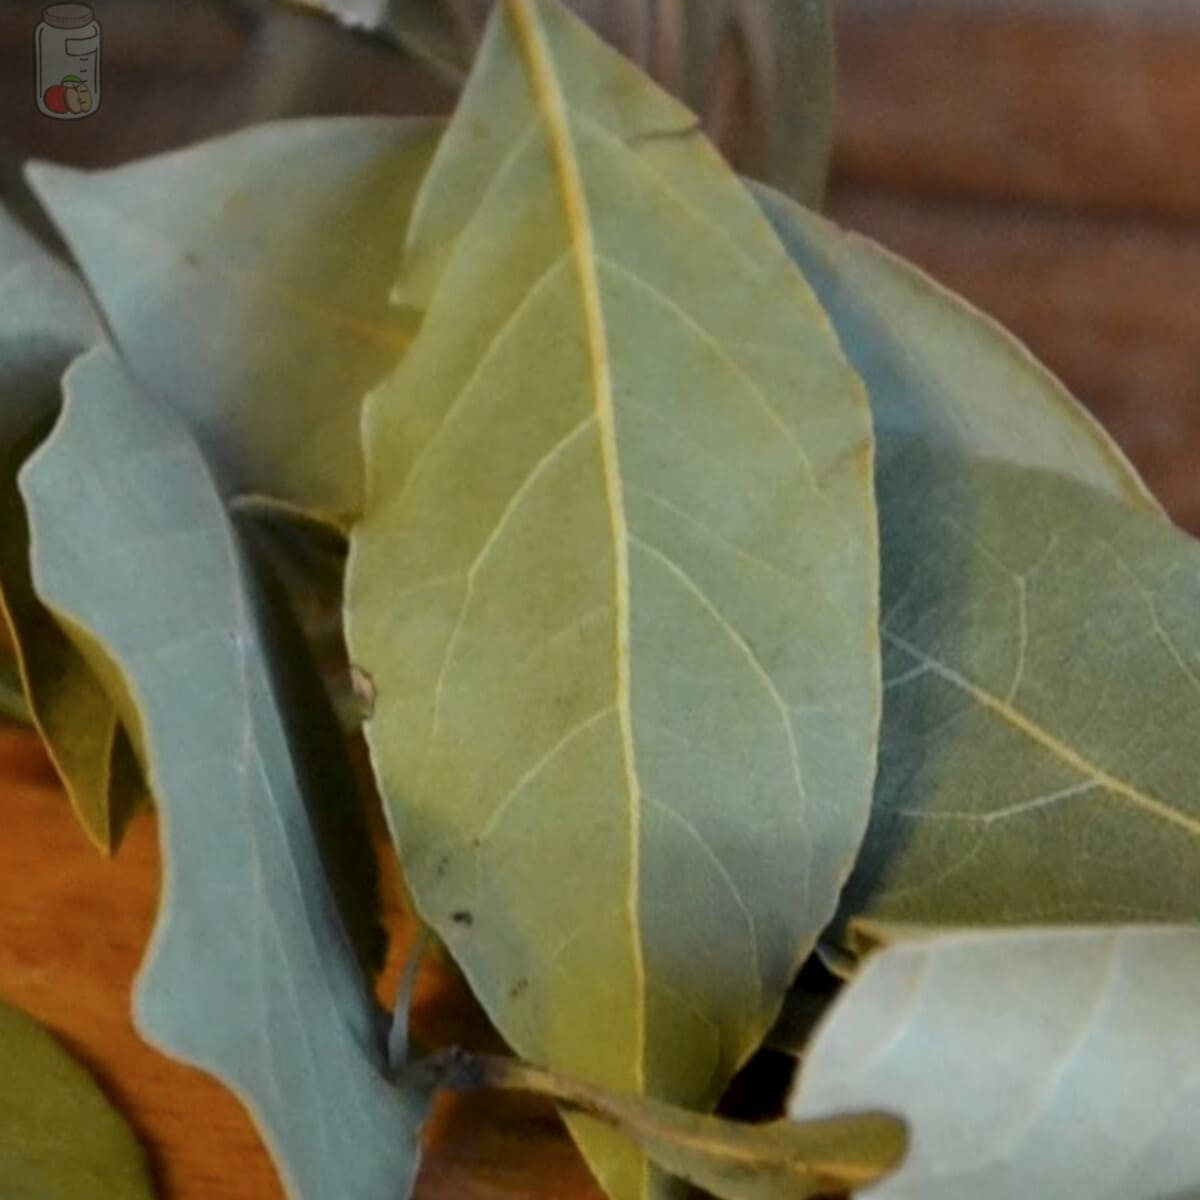 Store Bay Leaves